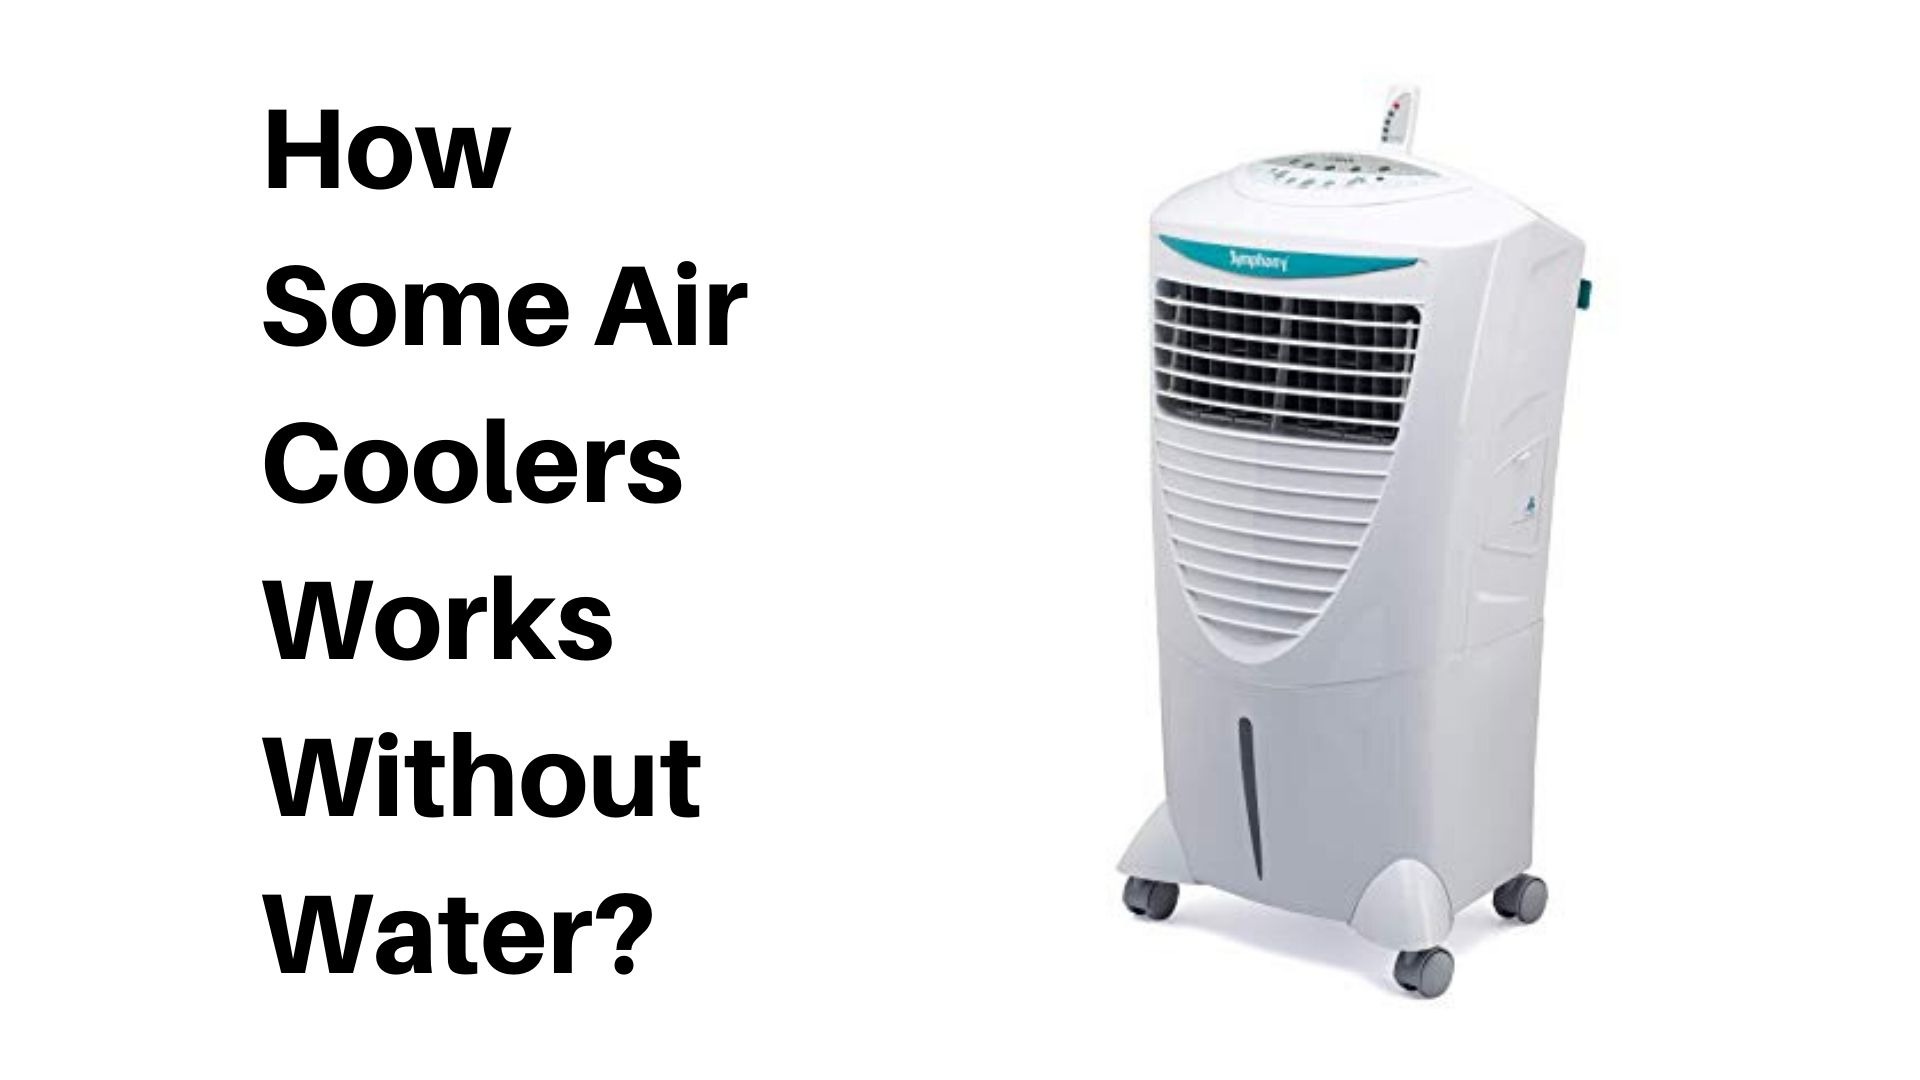 How Some Air Coolers Works Without Water